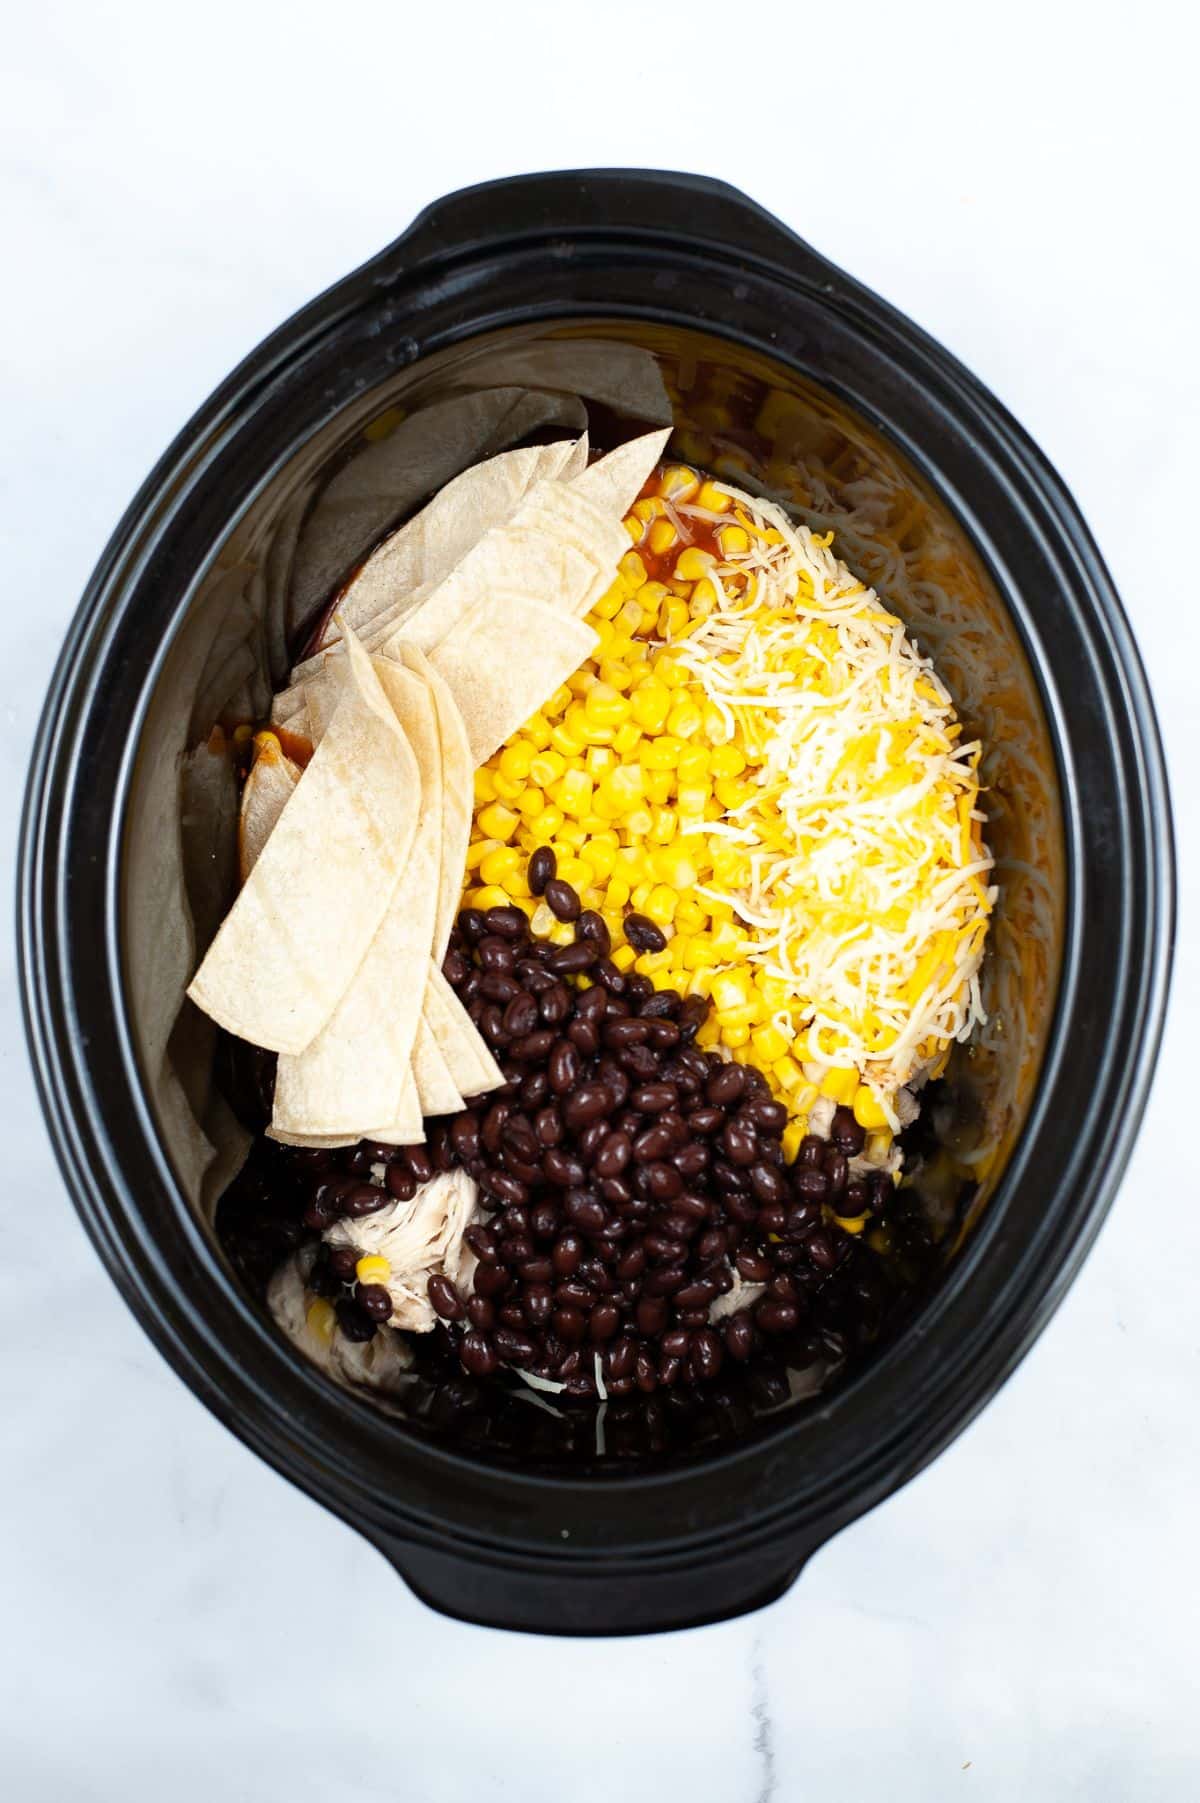 Corn, beans, tortillas, and cheese are added to the crock pot.